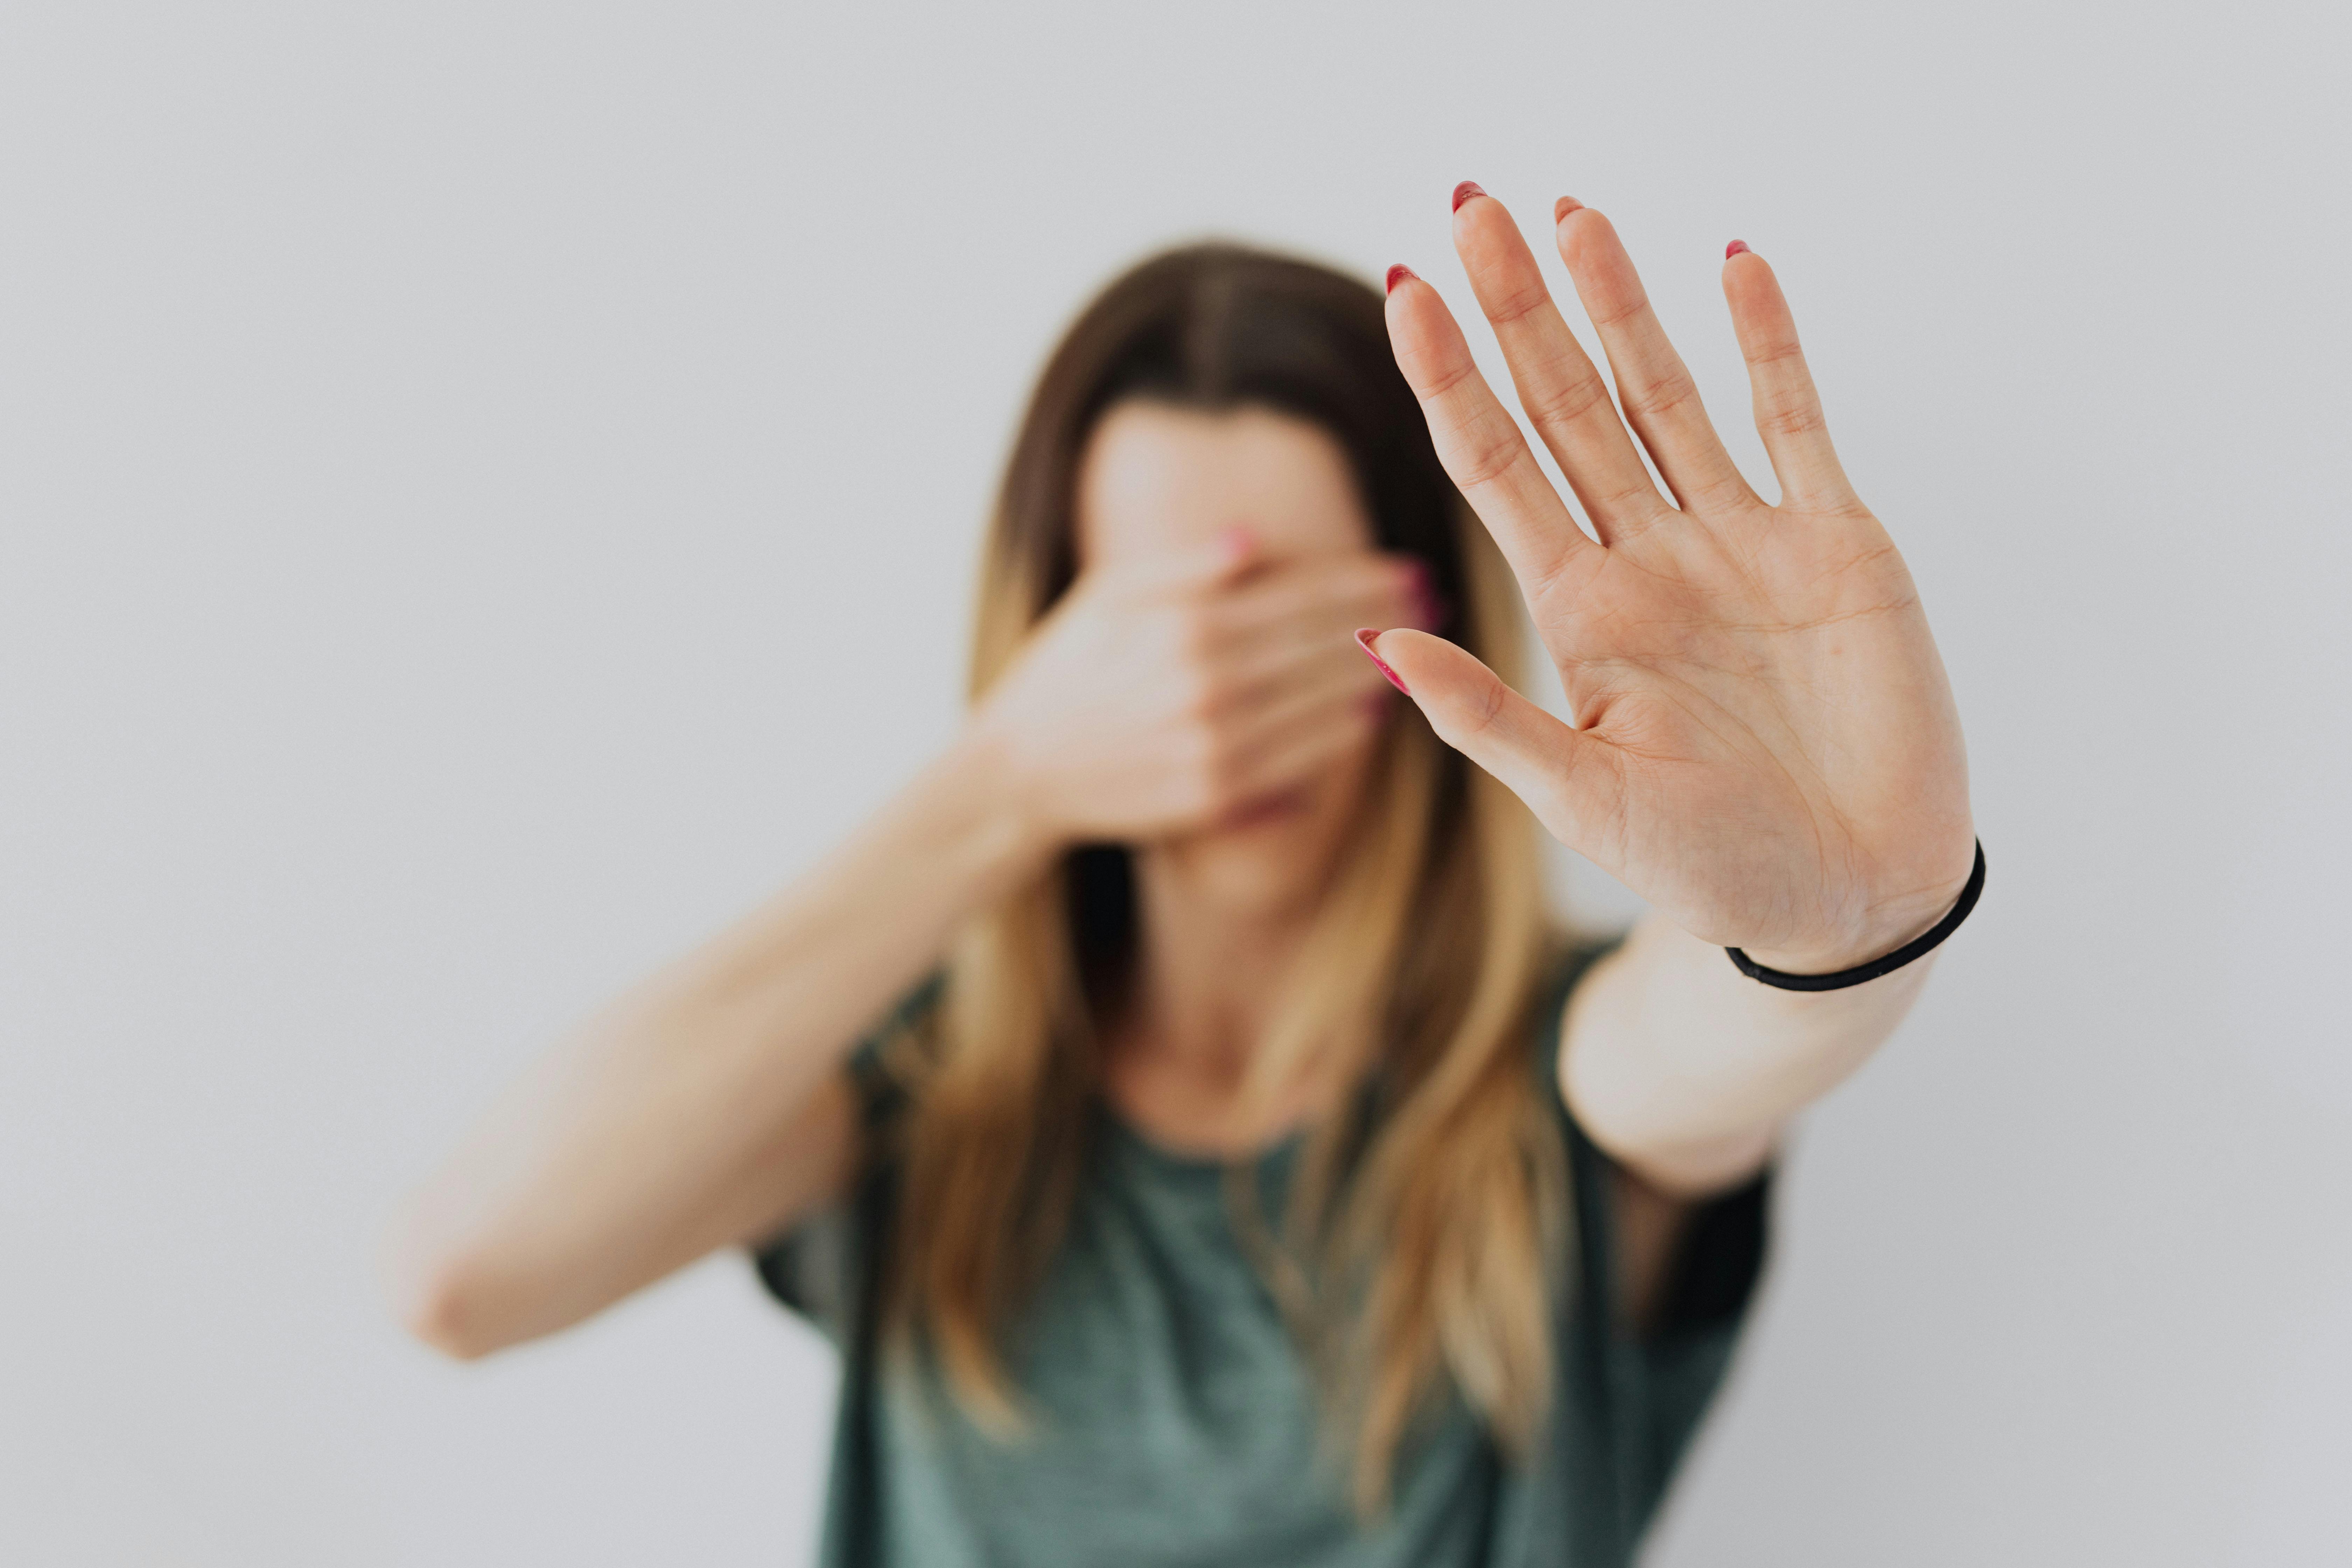 Woman covering her face with her hand | Source: Pexels